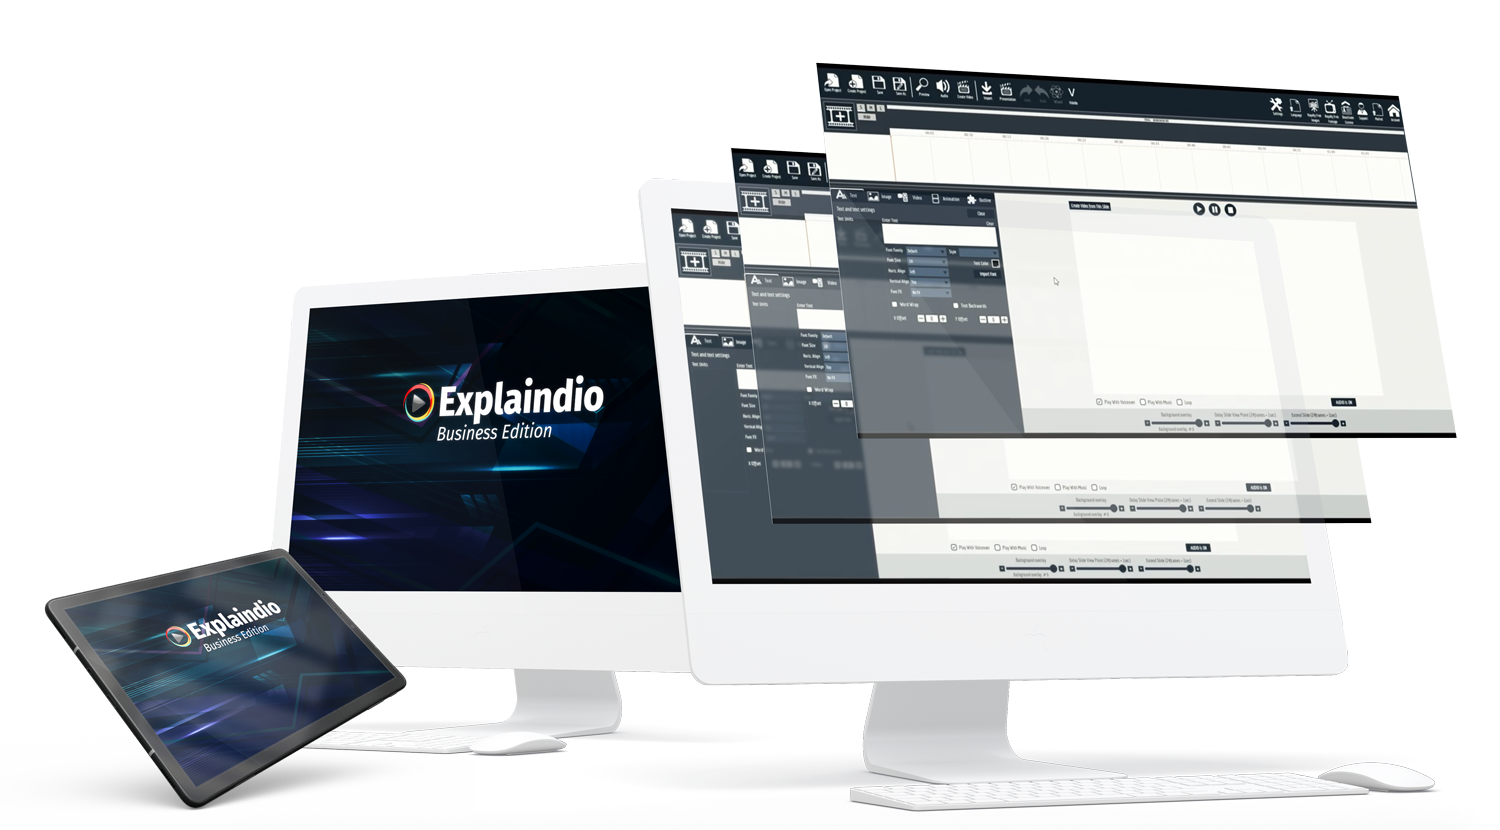 Explaindio 2022 Review – Best Discover Secret WARP Video Technology, Which Makes More Sales Of Both Your Own & Affiliate Products, And Makes Businesses Crave Your Video Services Even If You Have No Clue How To Make A Video!